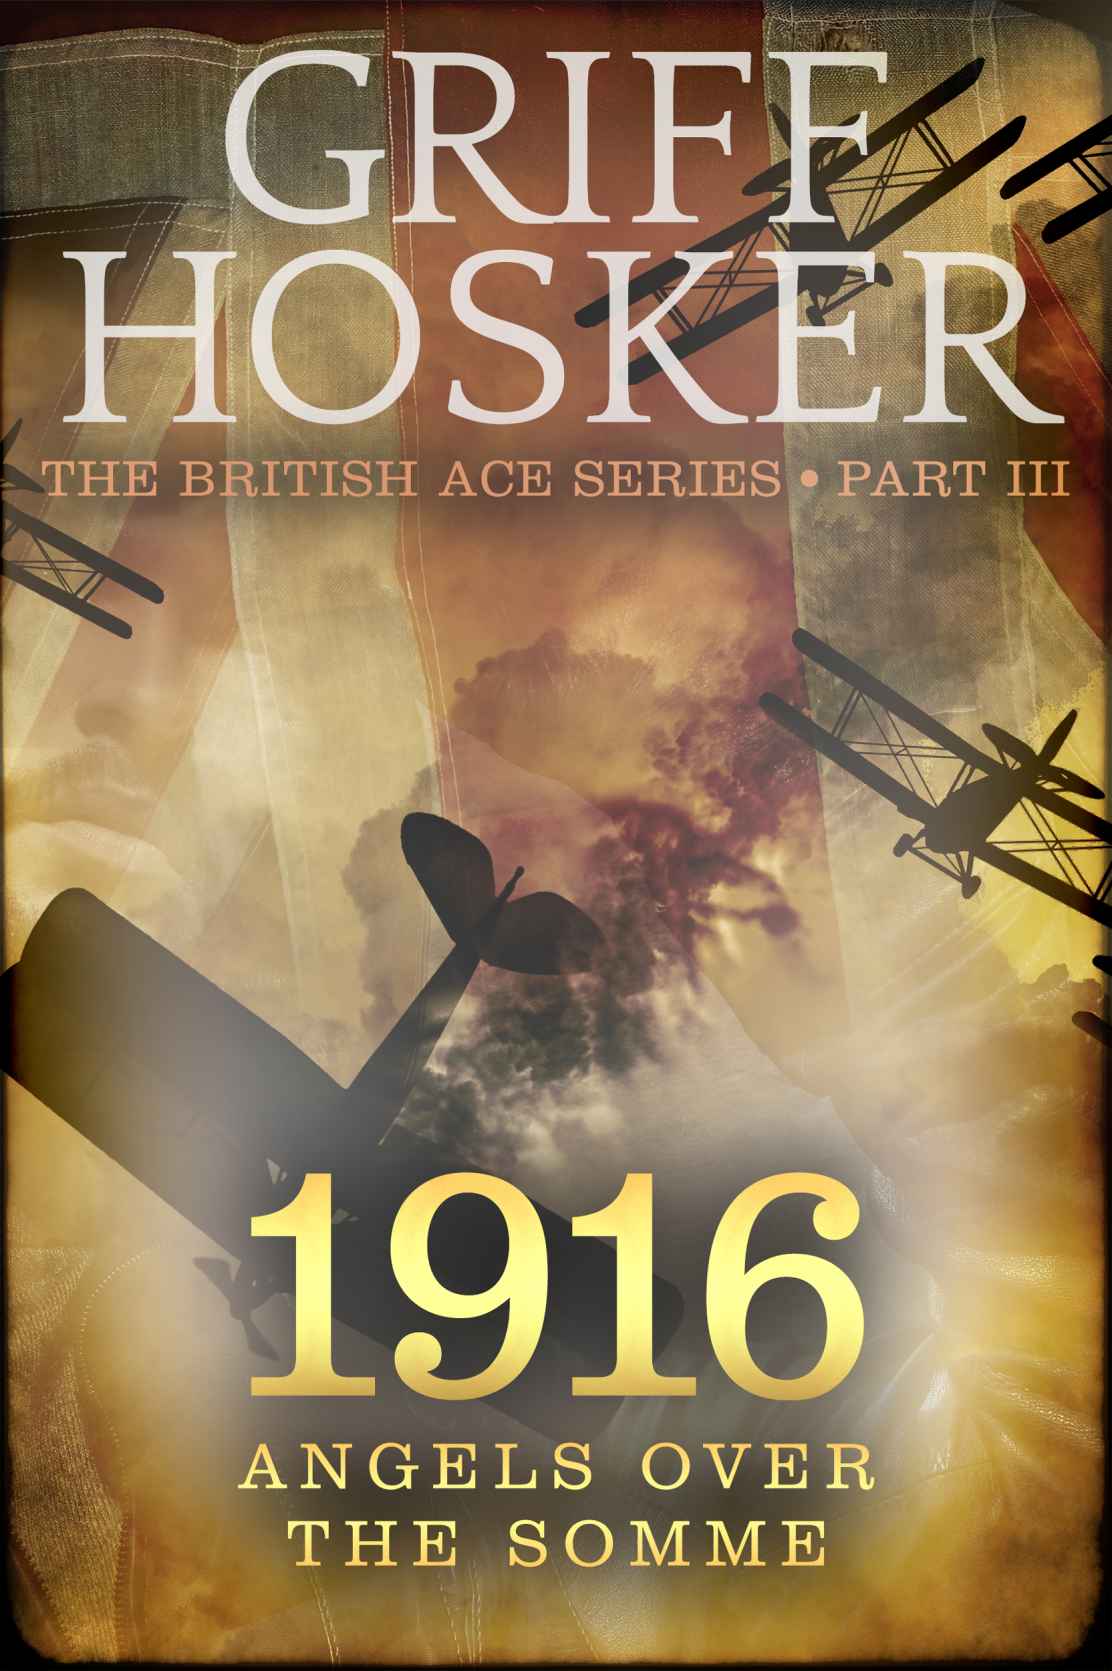 1916 Angels over the Somme (British Ace Book 3) by Griff Hosker